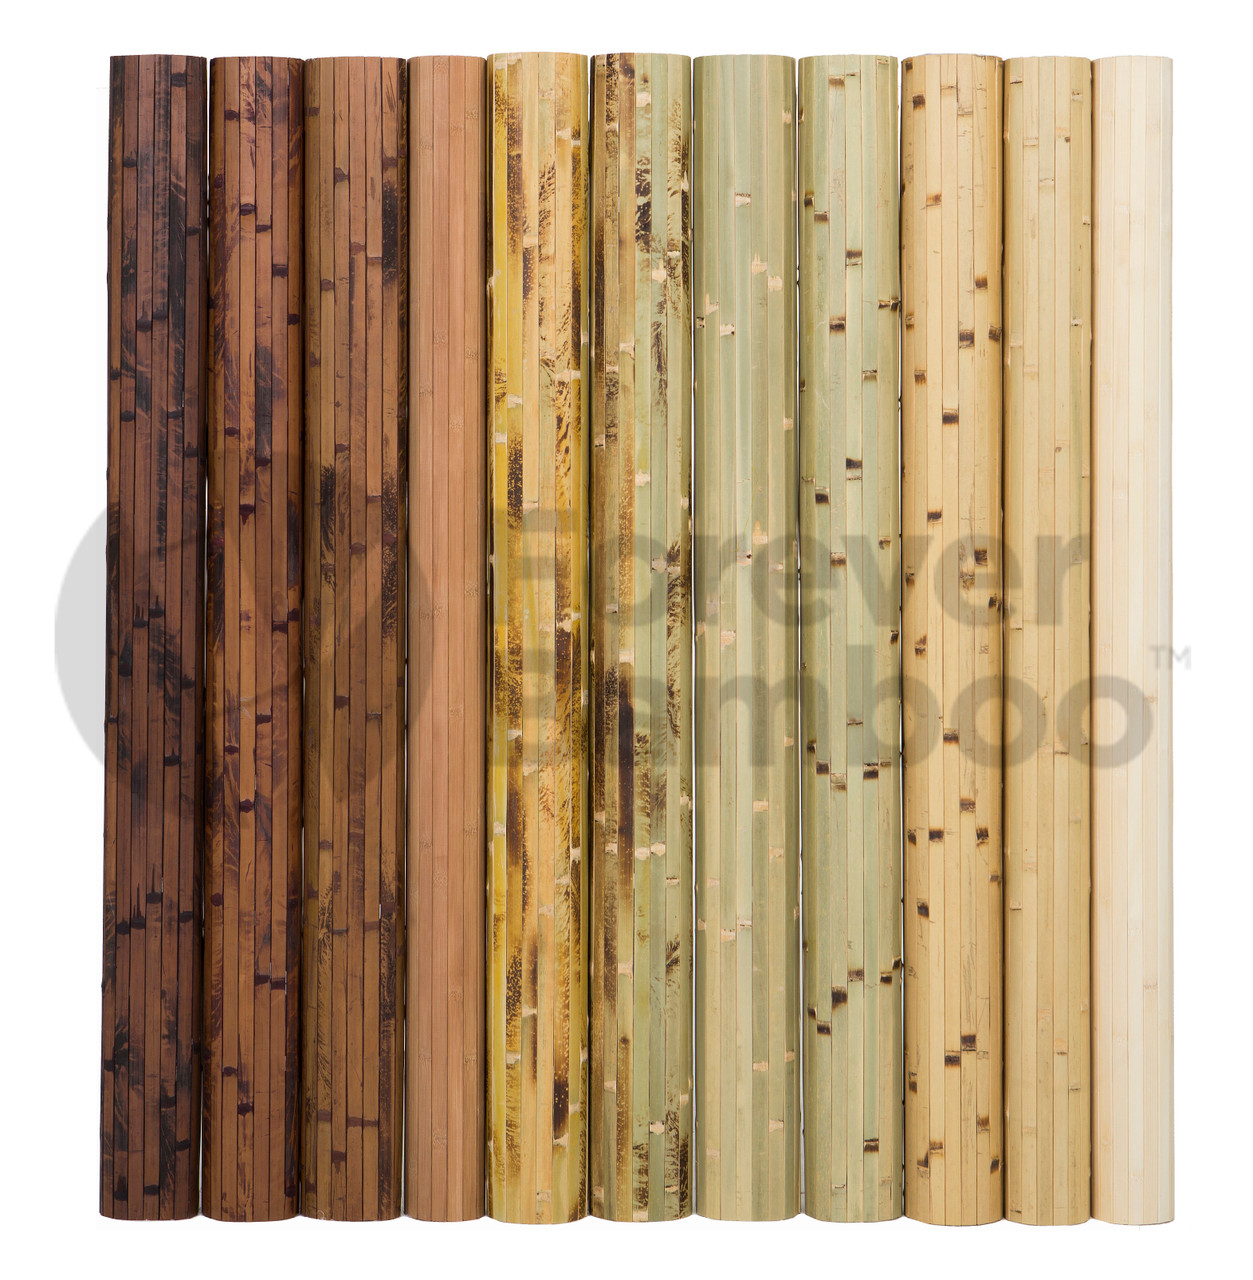 12x12 Blank Bamboo Panel - Sustainable & Versatile Eco-Friendly Canvas